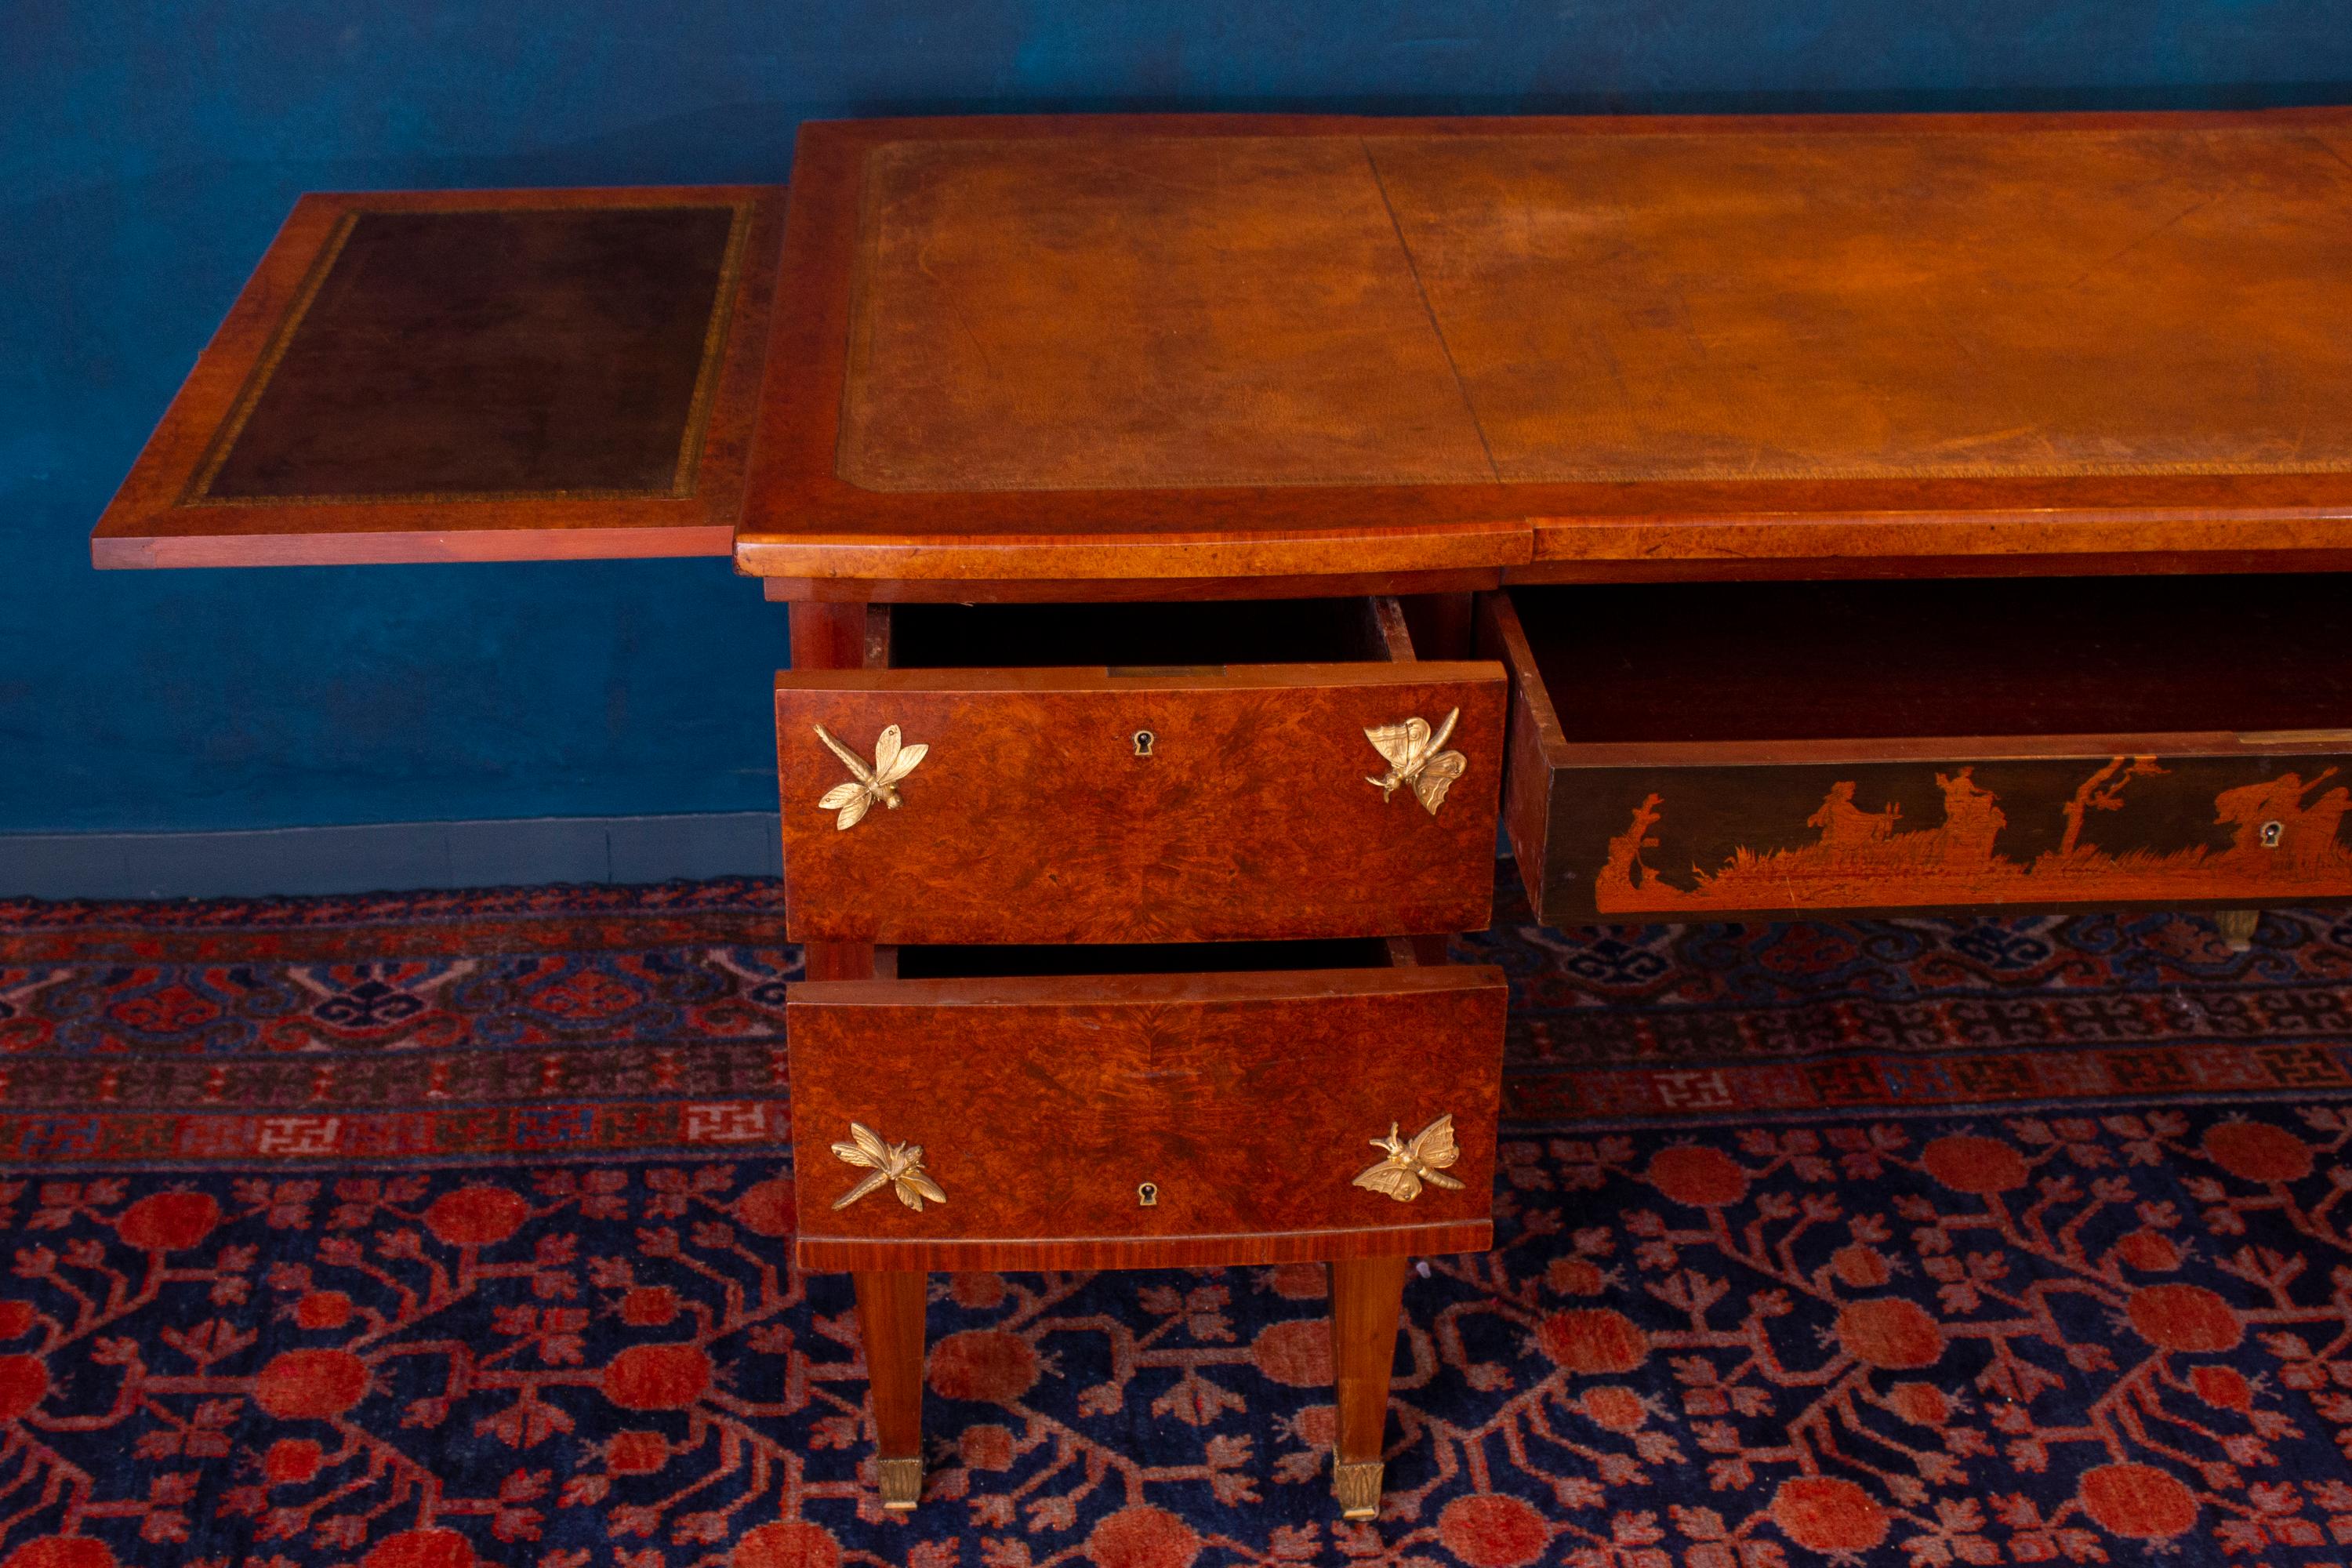 20th Century Liberty Outstanding Writing Desk Attributed to V. Ducrot 1930' For Sale